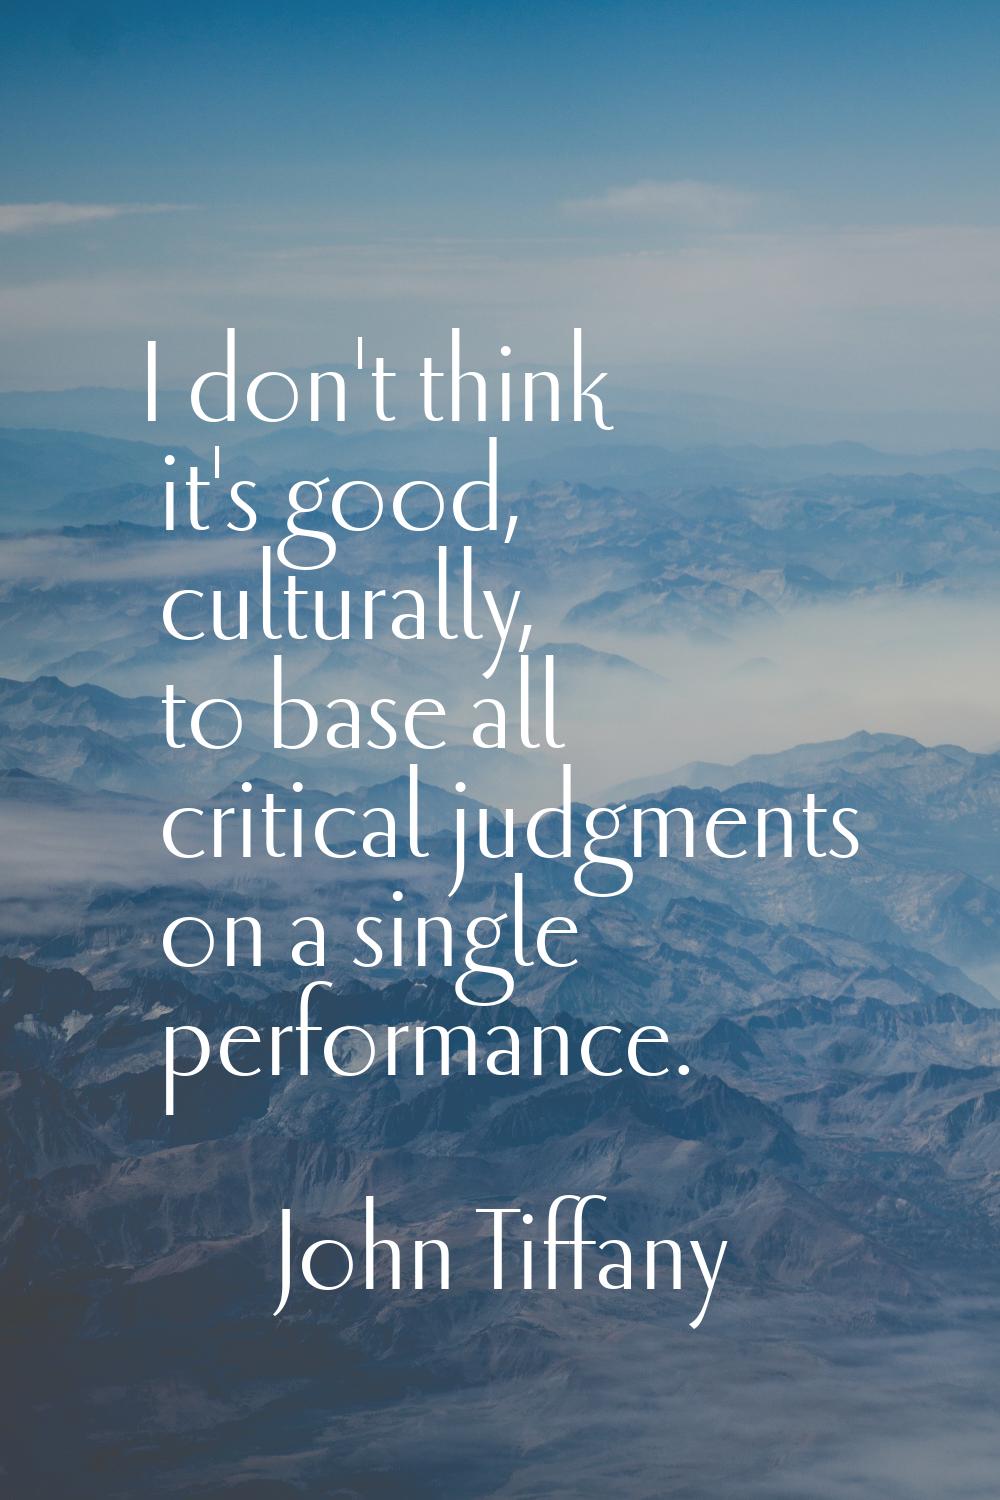 I don't think it's good, culturally, to base all critical judgments on a single performance.